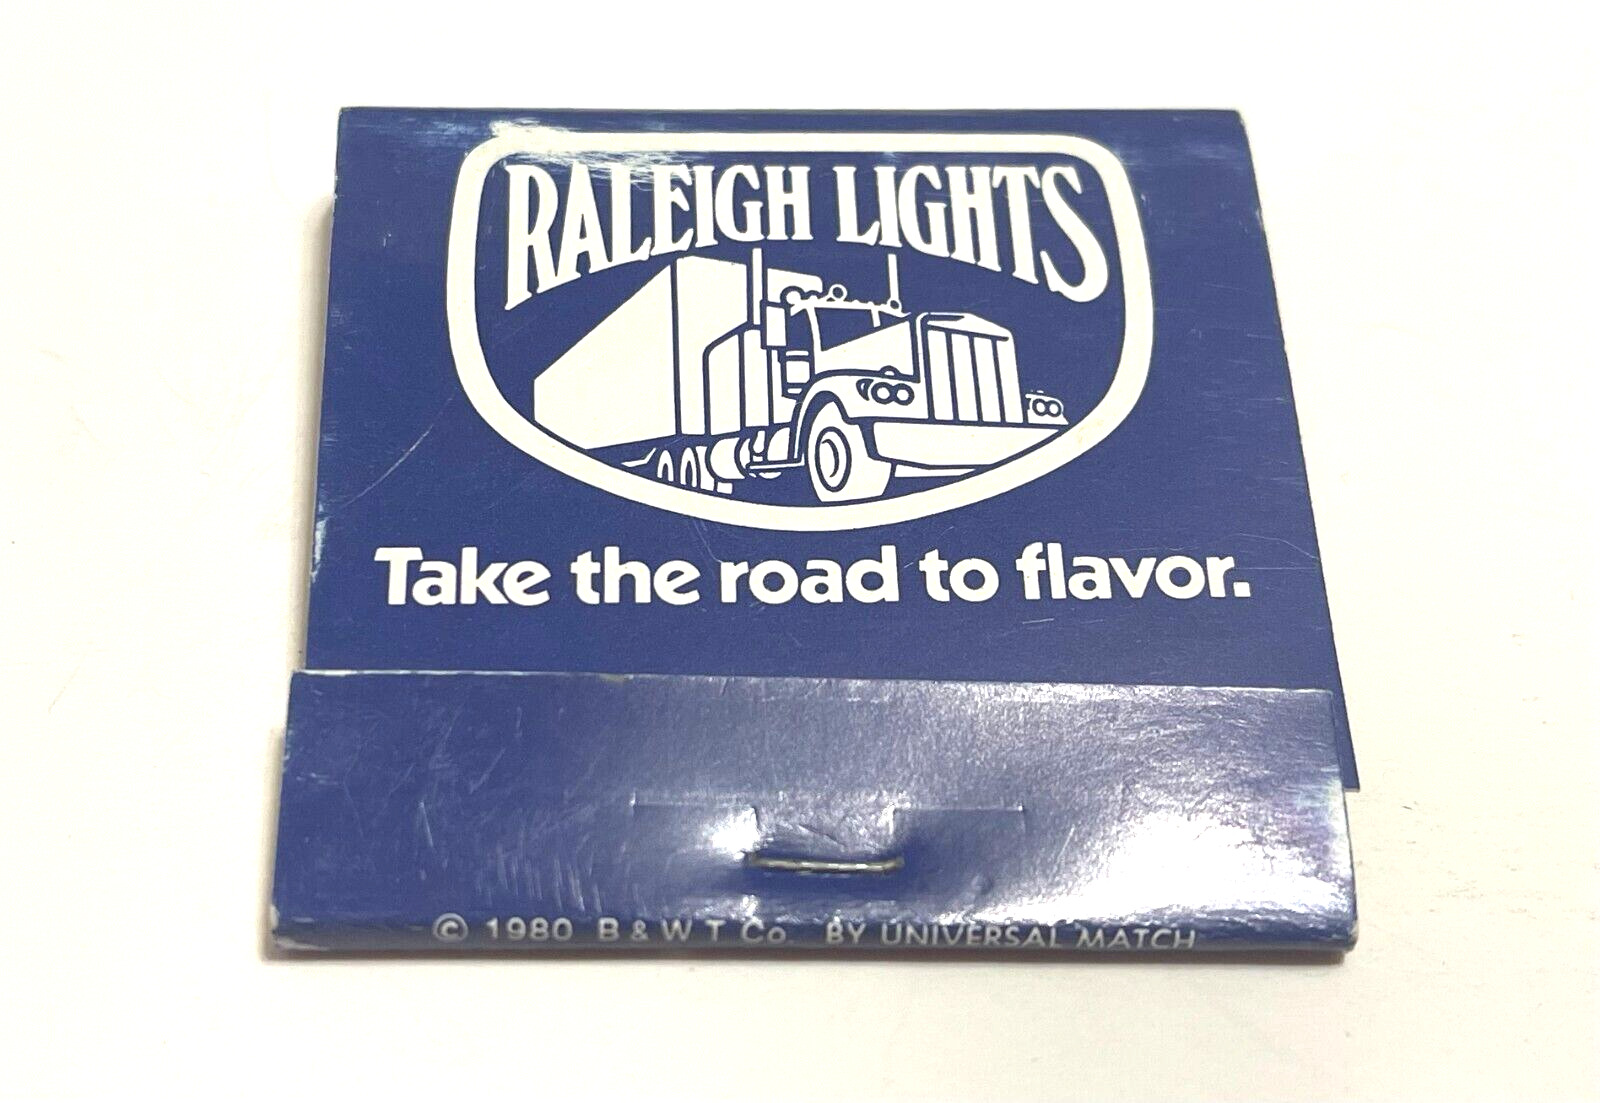 Vintage Matchbook Collectible Ephemera RALEIGH LIGHTS KINGS & 100s Cigarettes